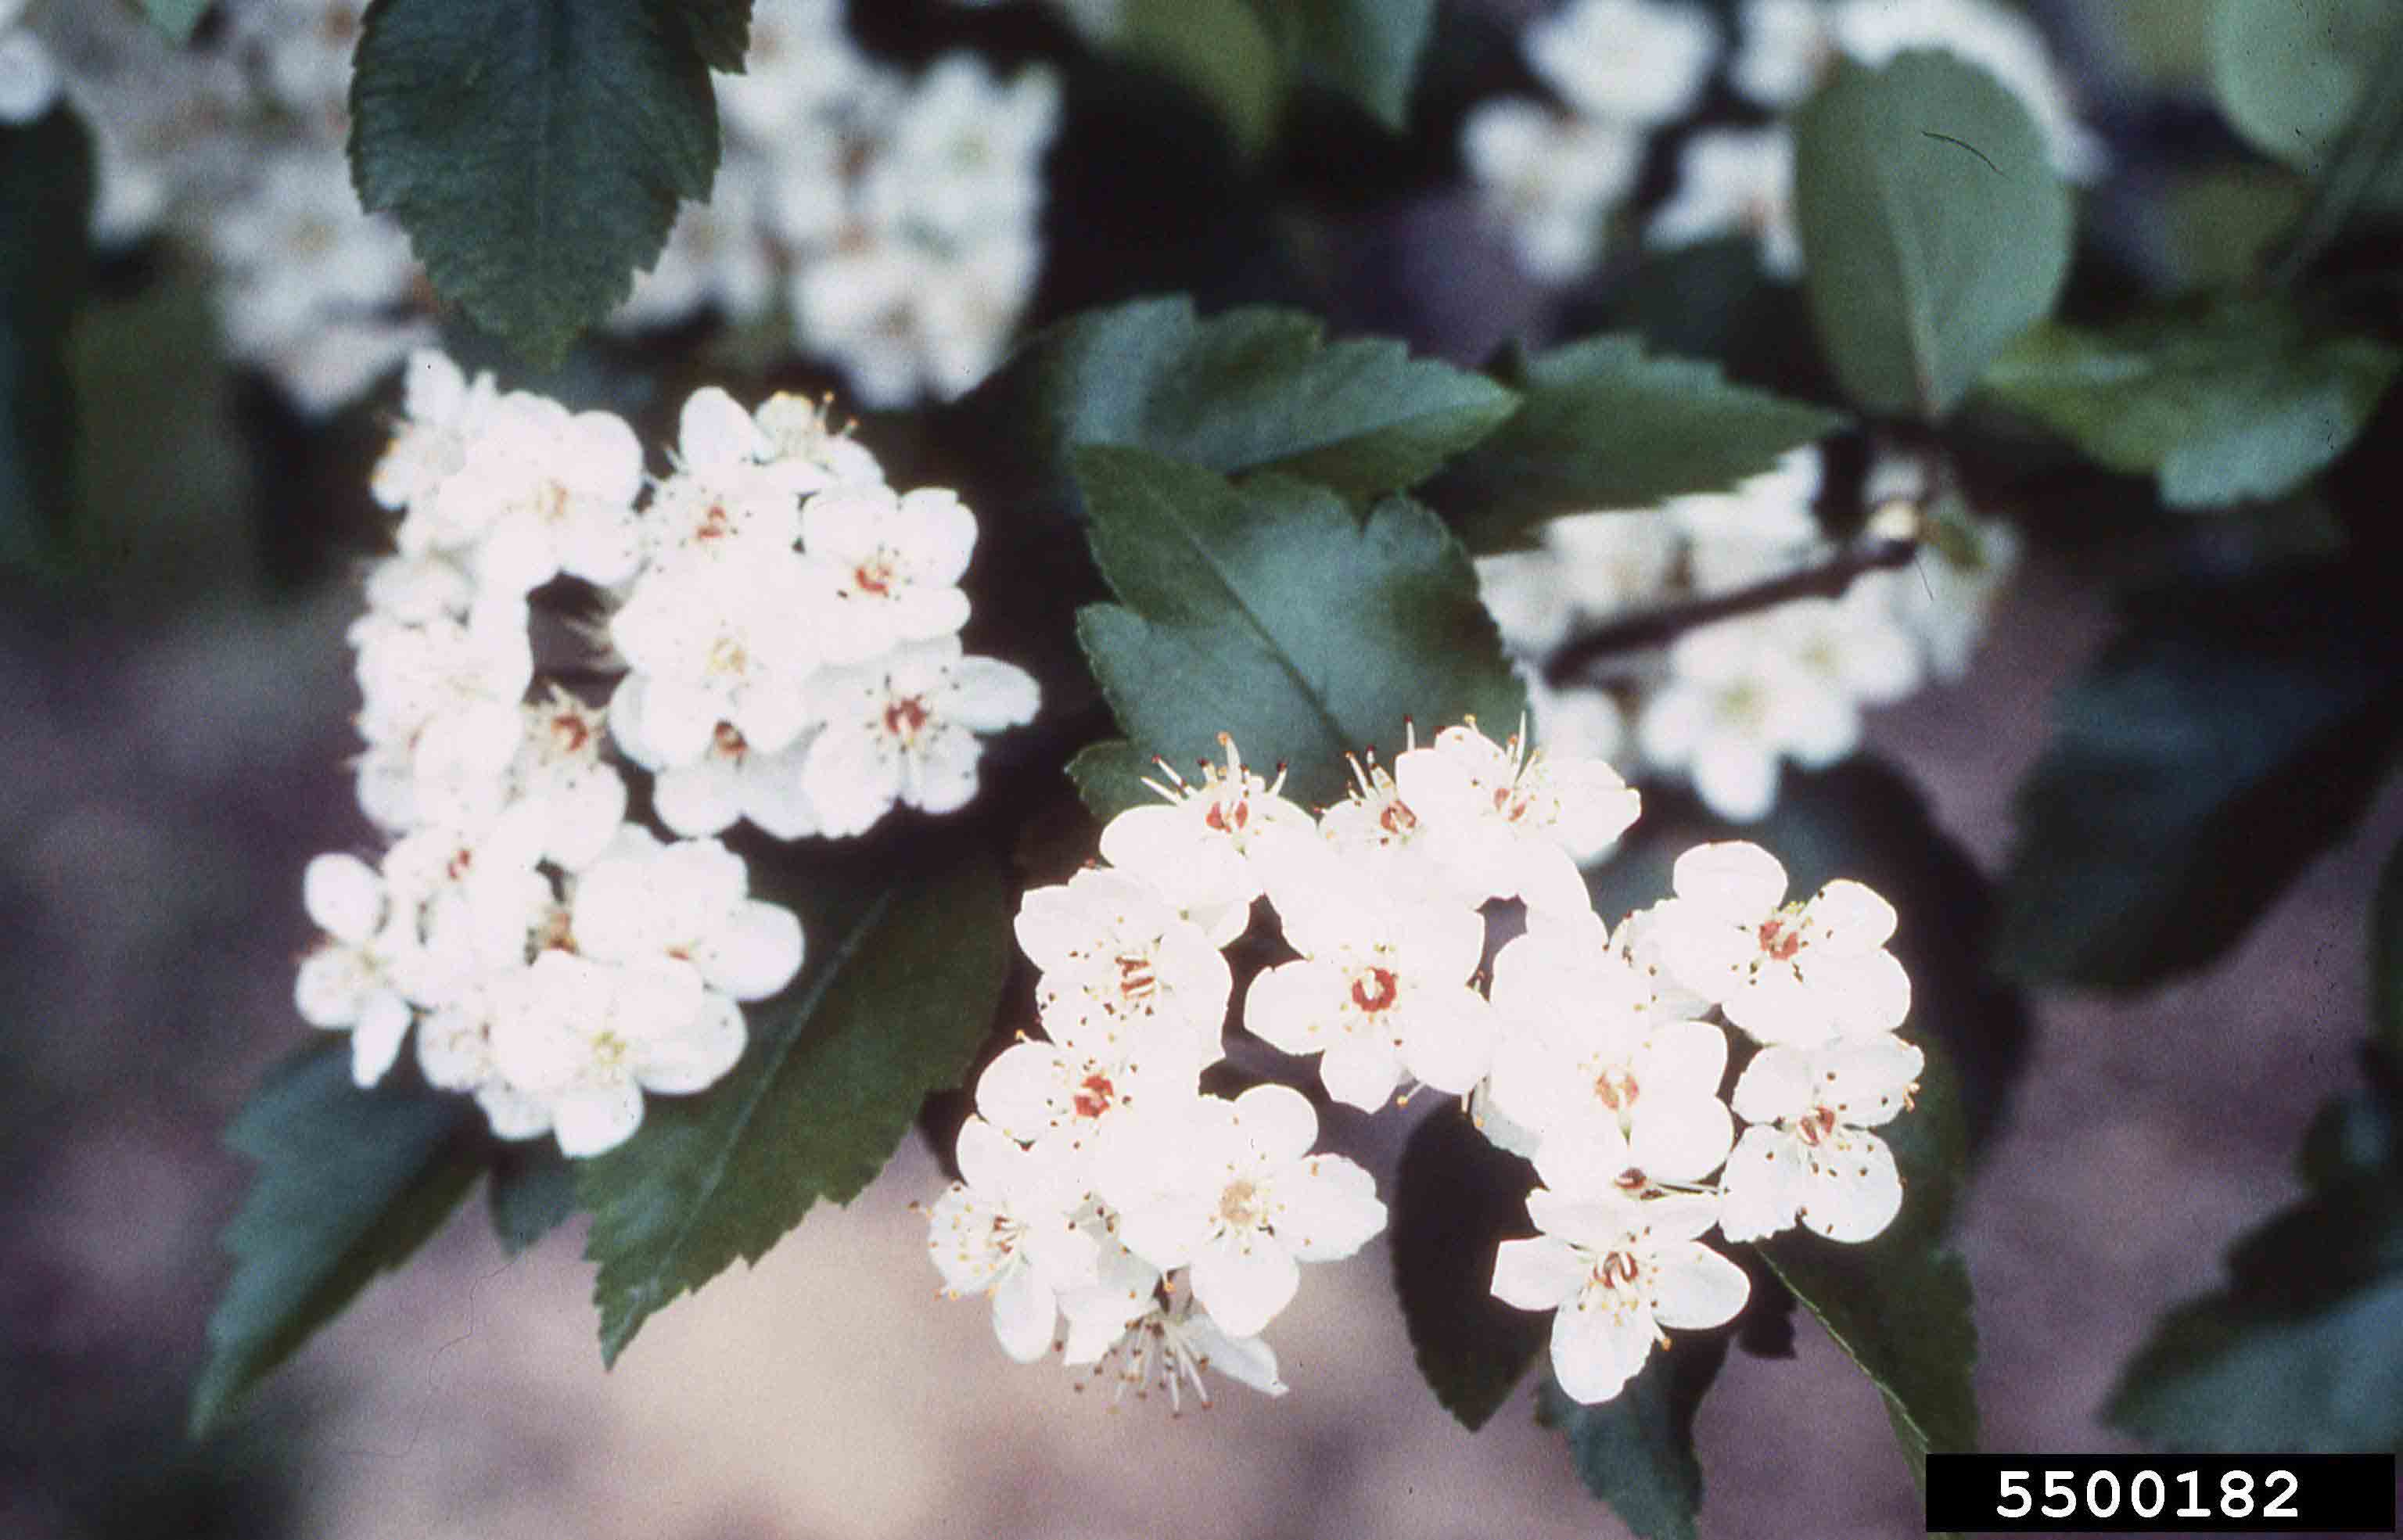 Glossy hawthorn flowers and leaves, with slight lobes and coarse teeth